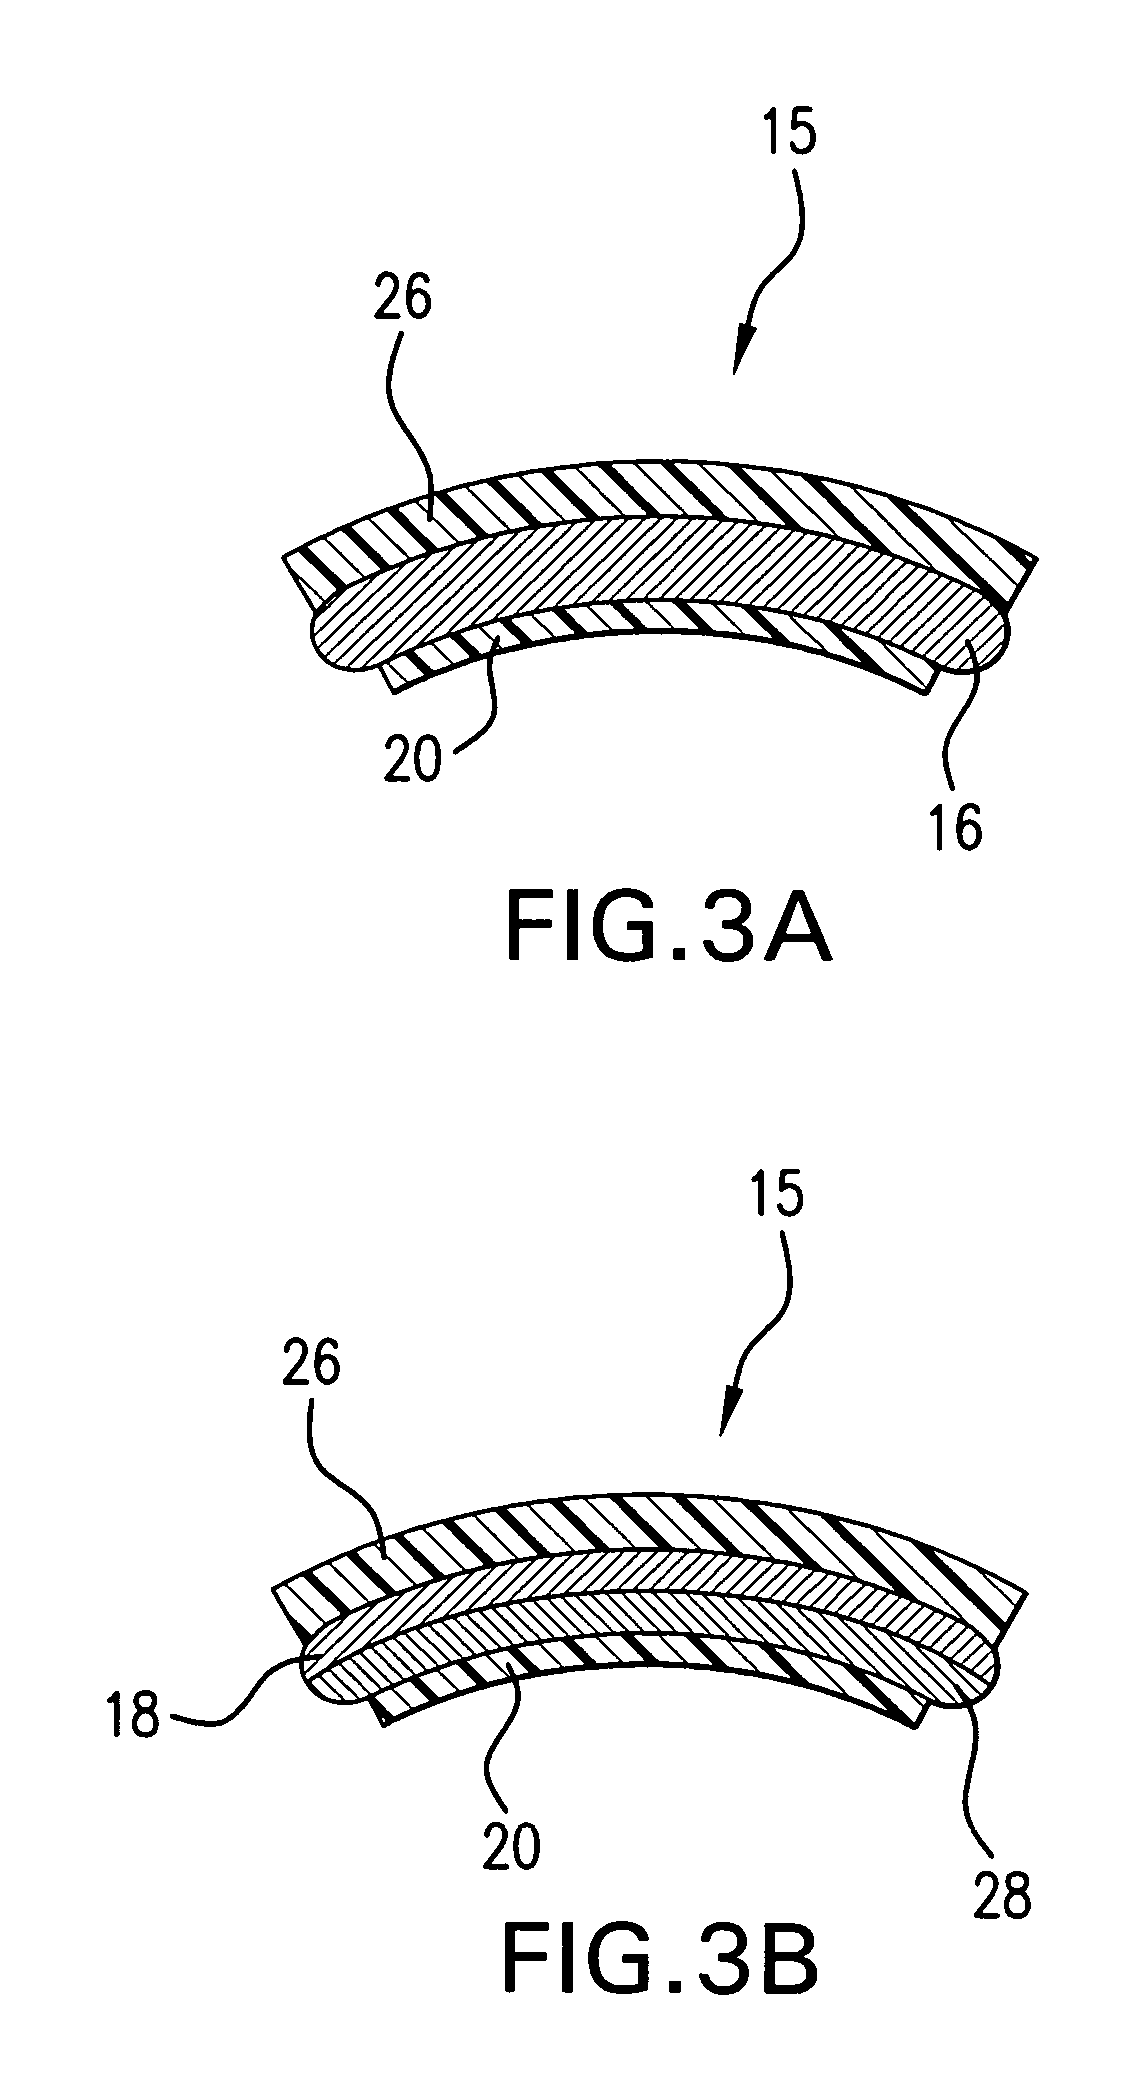 Weighted thigh pad exercise apparatus and method of use